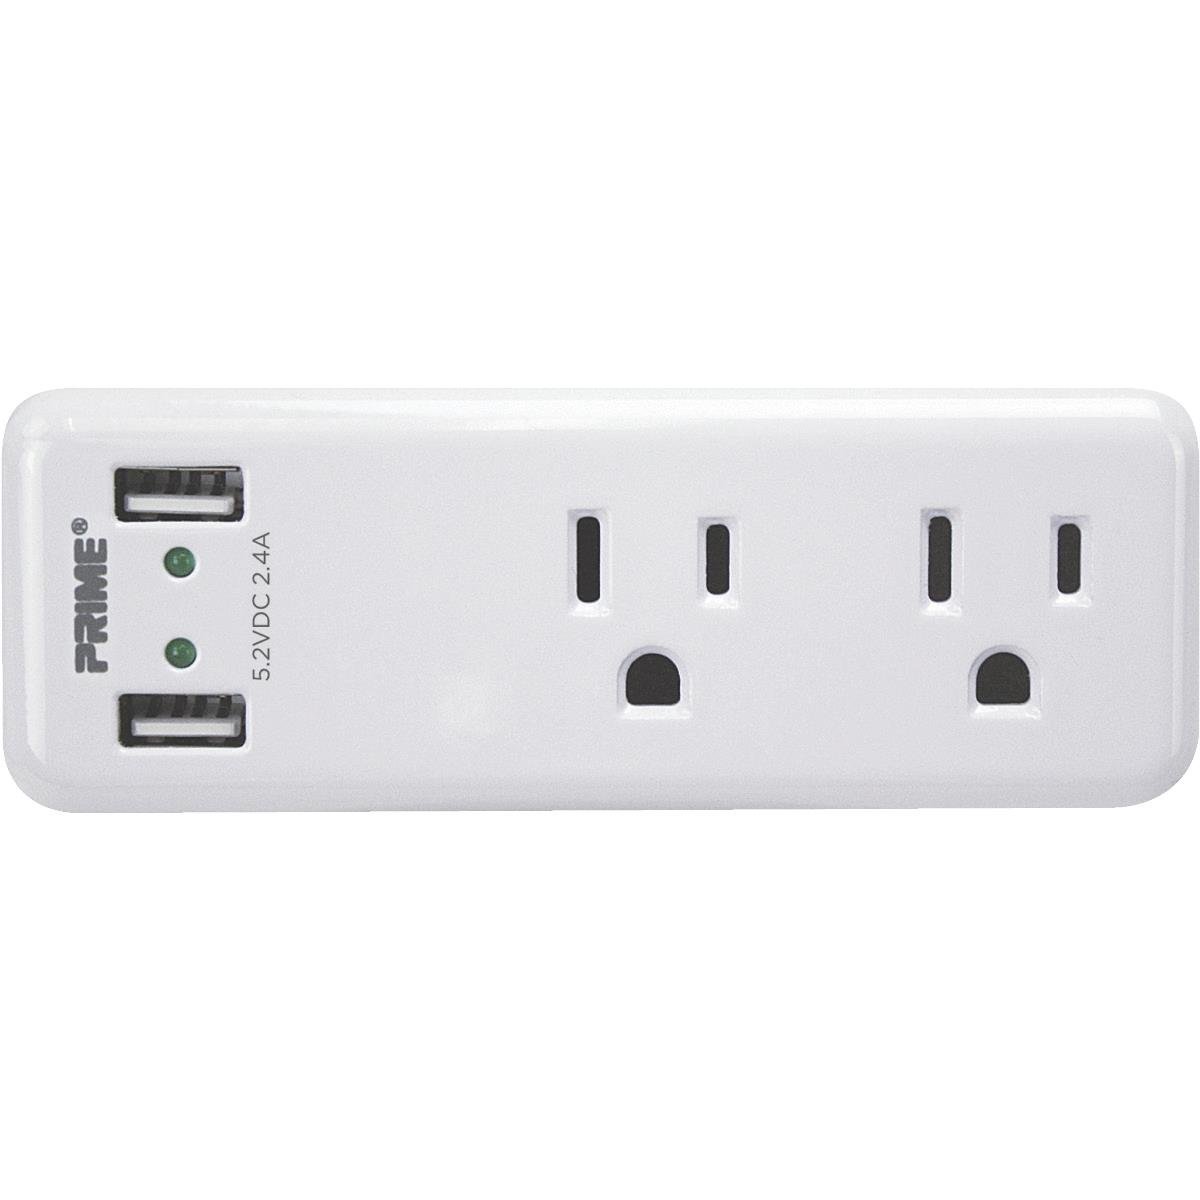 125 V 2-Outlet & 2.4A 2-USB Port High Speed Charger, White -  Proplus, PR783778